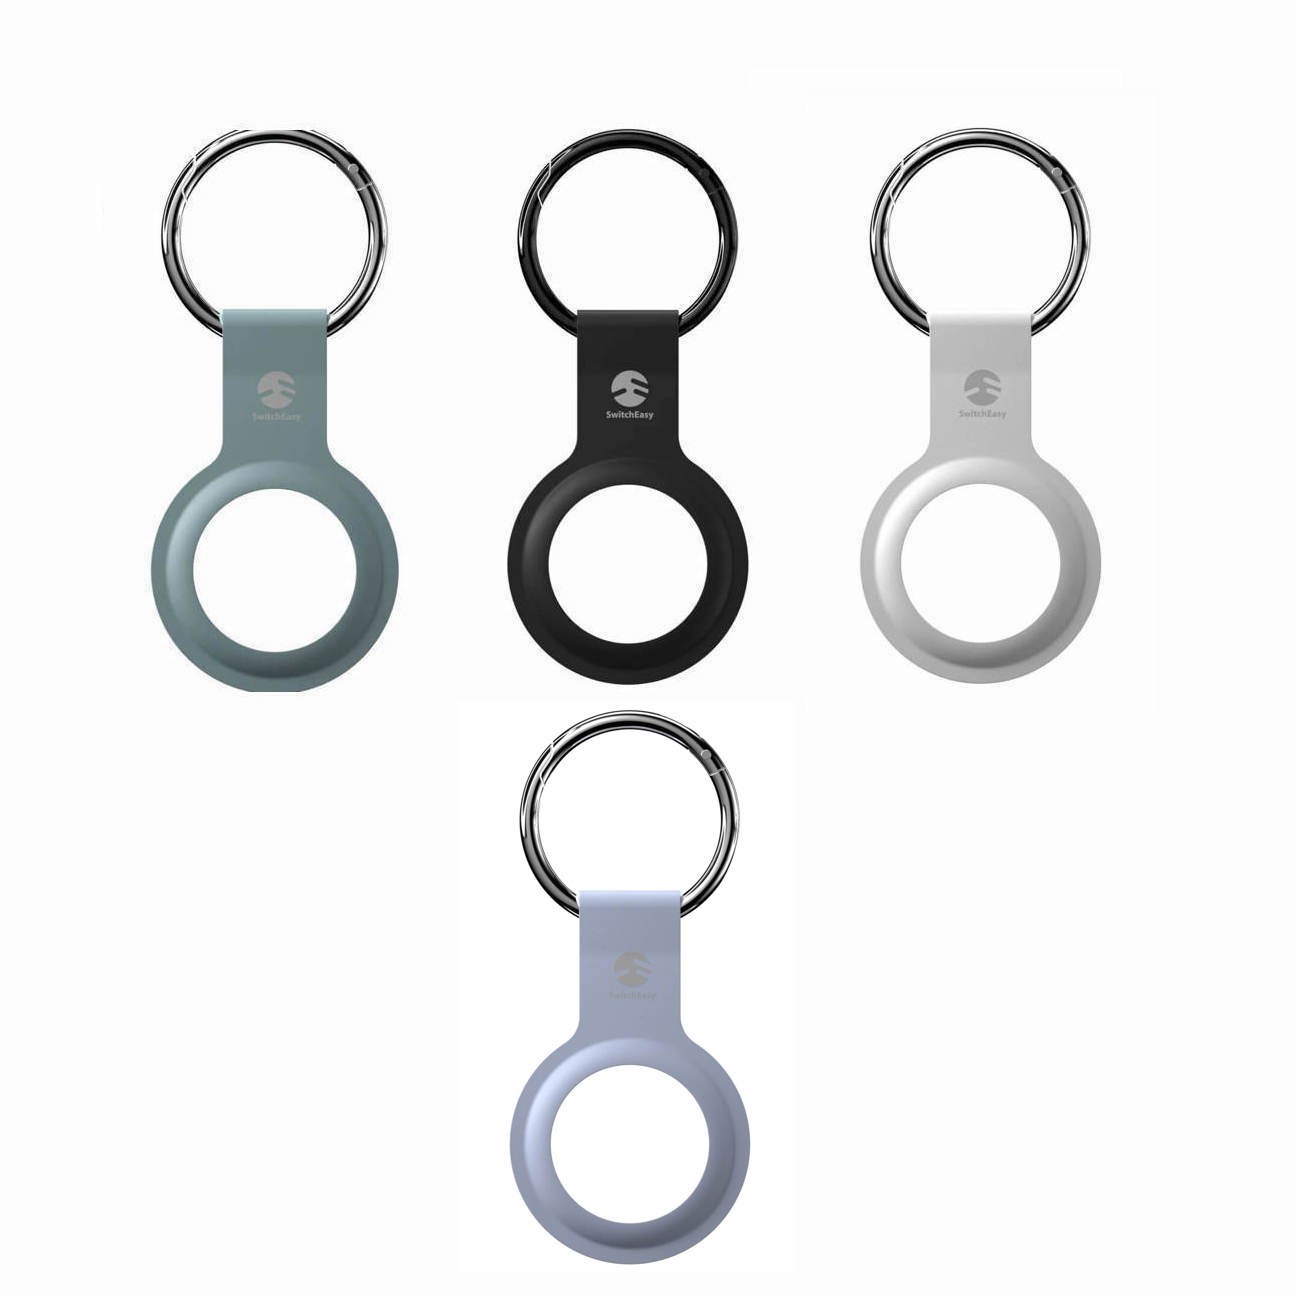 Skin Silicone AirTag Keyring / Protective Case - 4 Pack – SwitchEasy